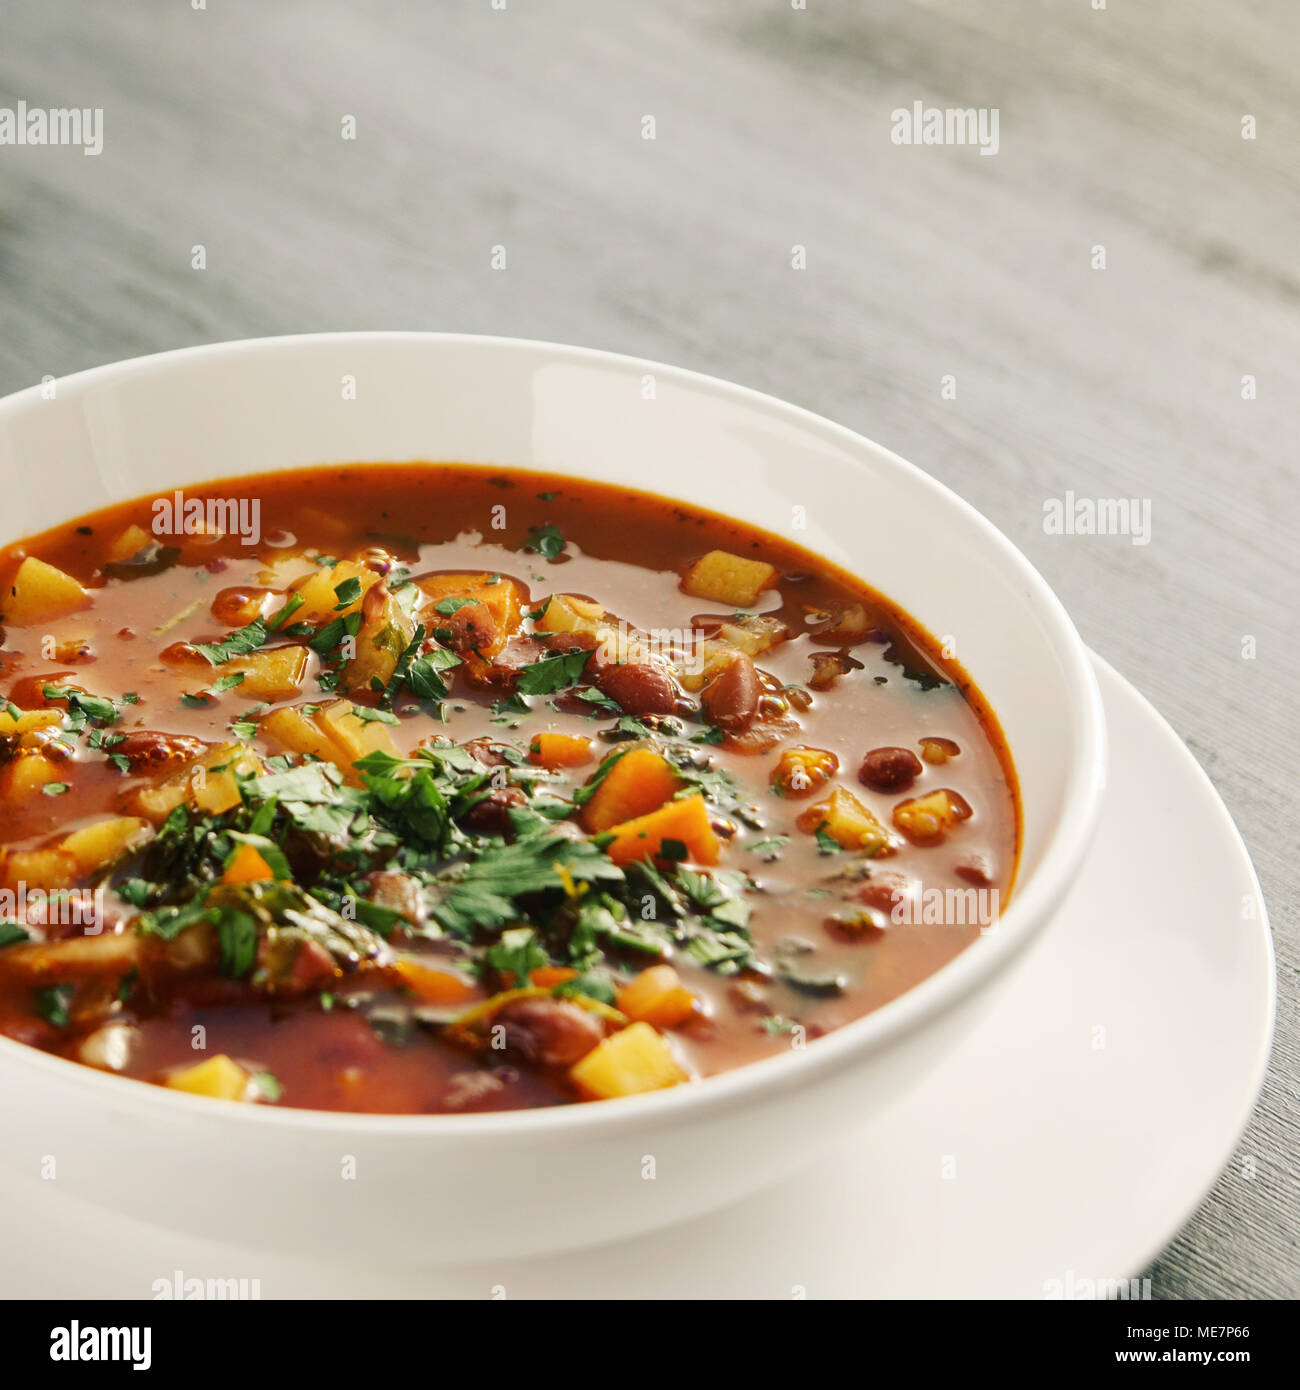 Tomato soup with red beans, potato and carrot. Vegan diet. European cuisine. Vegetarian dish. Main course. Organic meal. Toned photo. Stock Photo